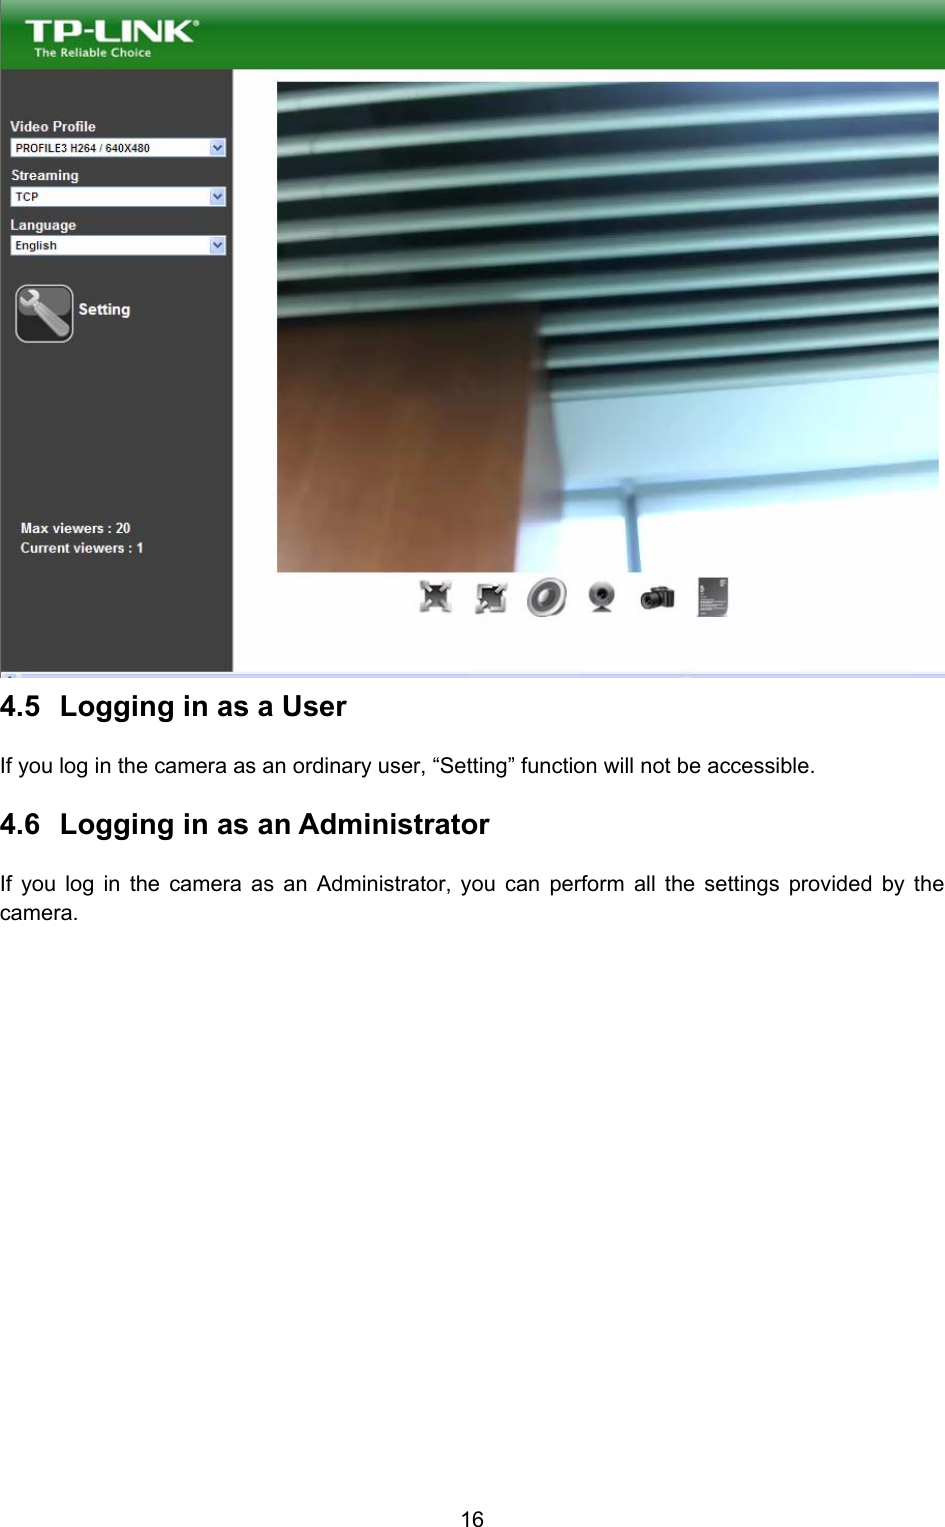  16  4.5  Logging in as a User   If you log in the camera as an ordinary user, “Setting” function will not be accessible. 4.6  Logging in as an Administrator   If you log in the camera as an Administrator, you can perform all the settings provided by the camera.  